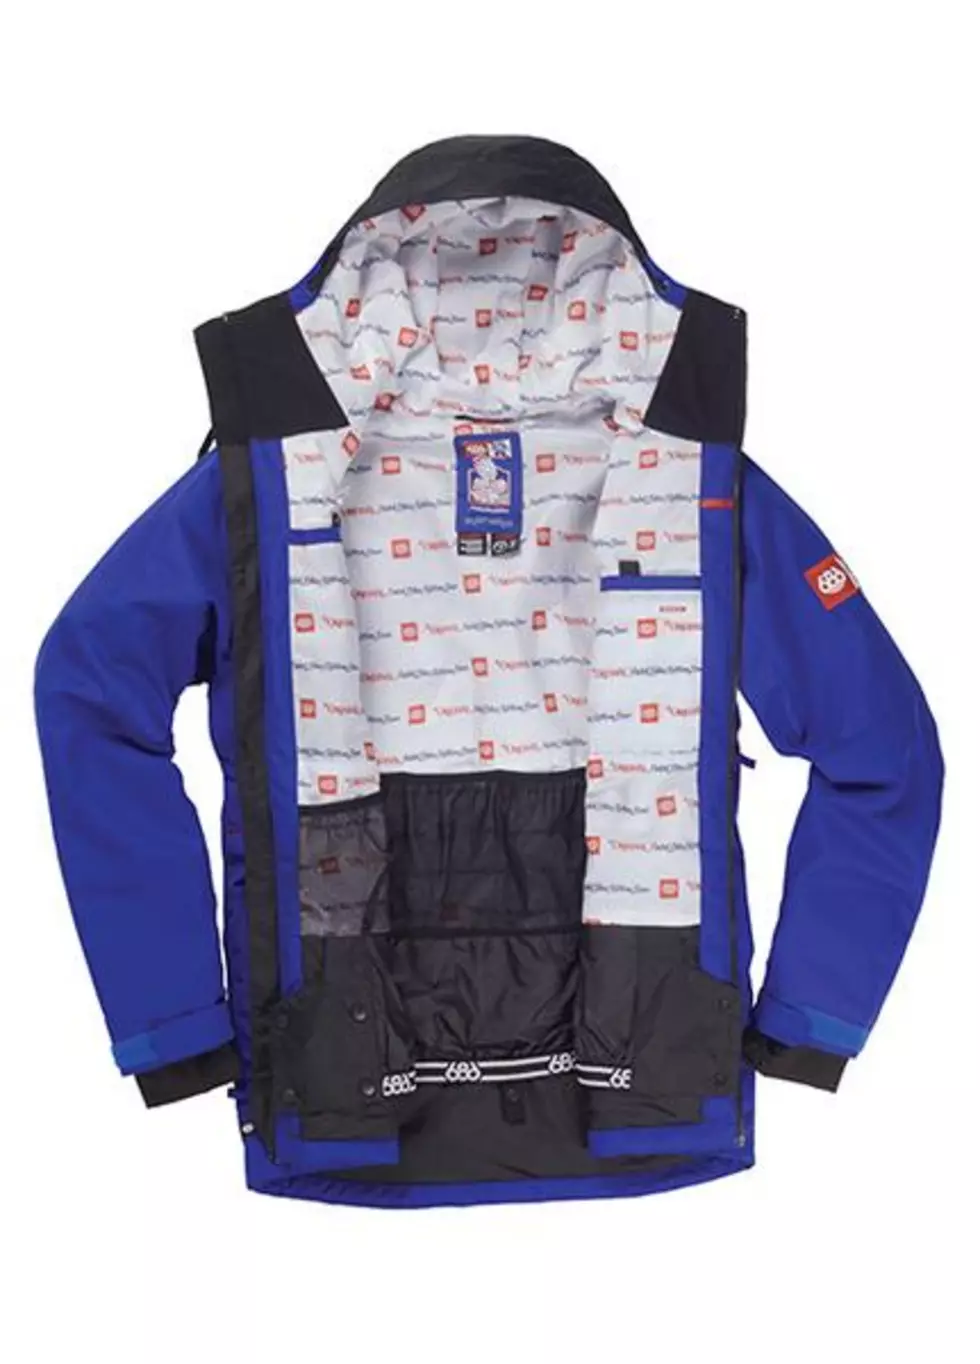 Snowboard Jacket That Holds a 12 Pack of Beer